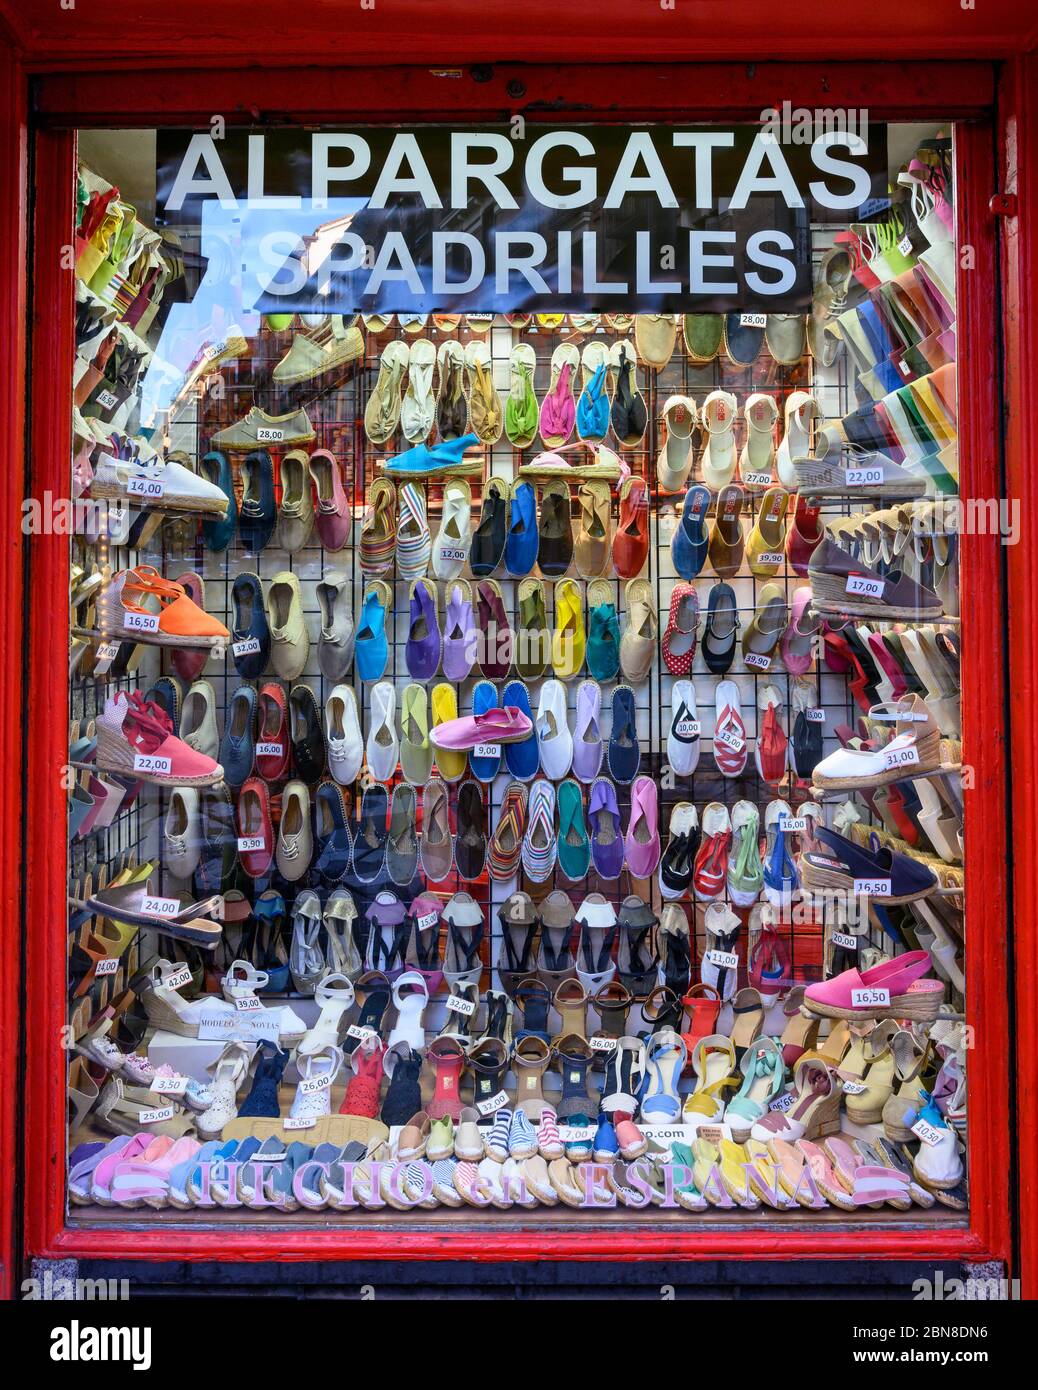 Madrid Shop In Spain High Resolution Stock Photography and Images - Alamy